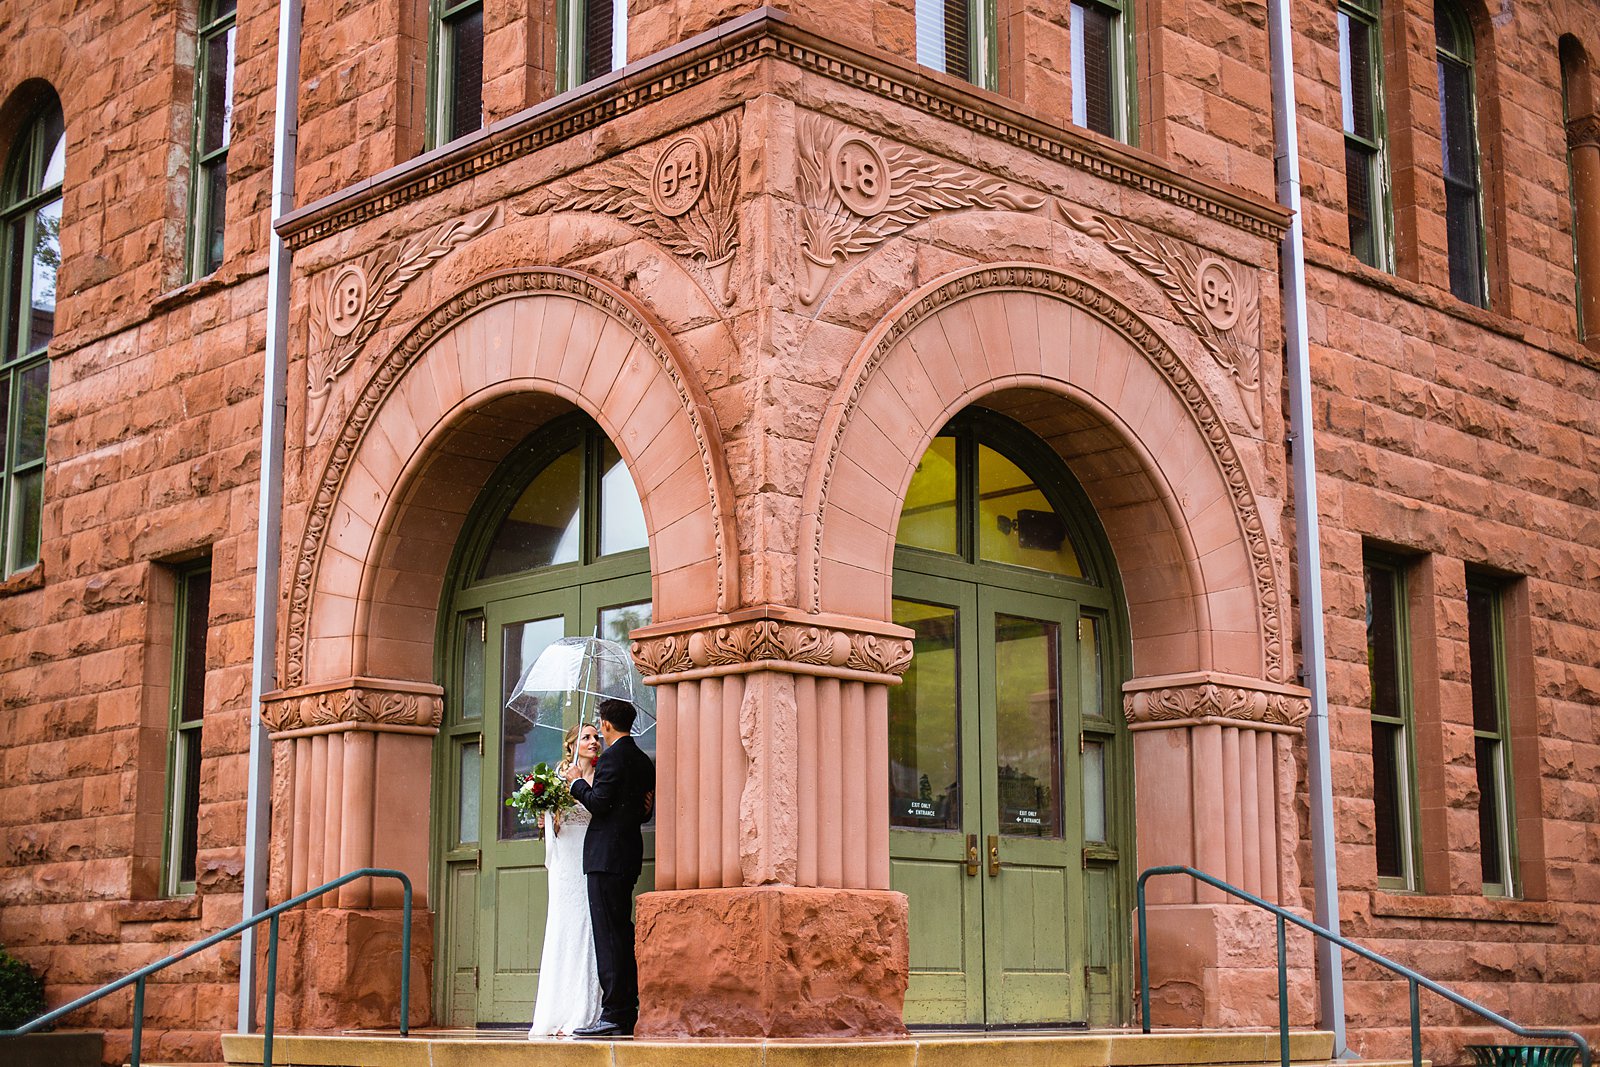 Bride and groom share an intimate moment during their rainy Flagstaff Courthouse wedding by Flagstaff wedding photographer PMA Photography.